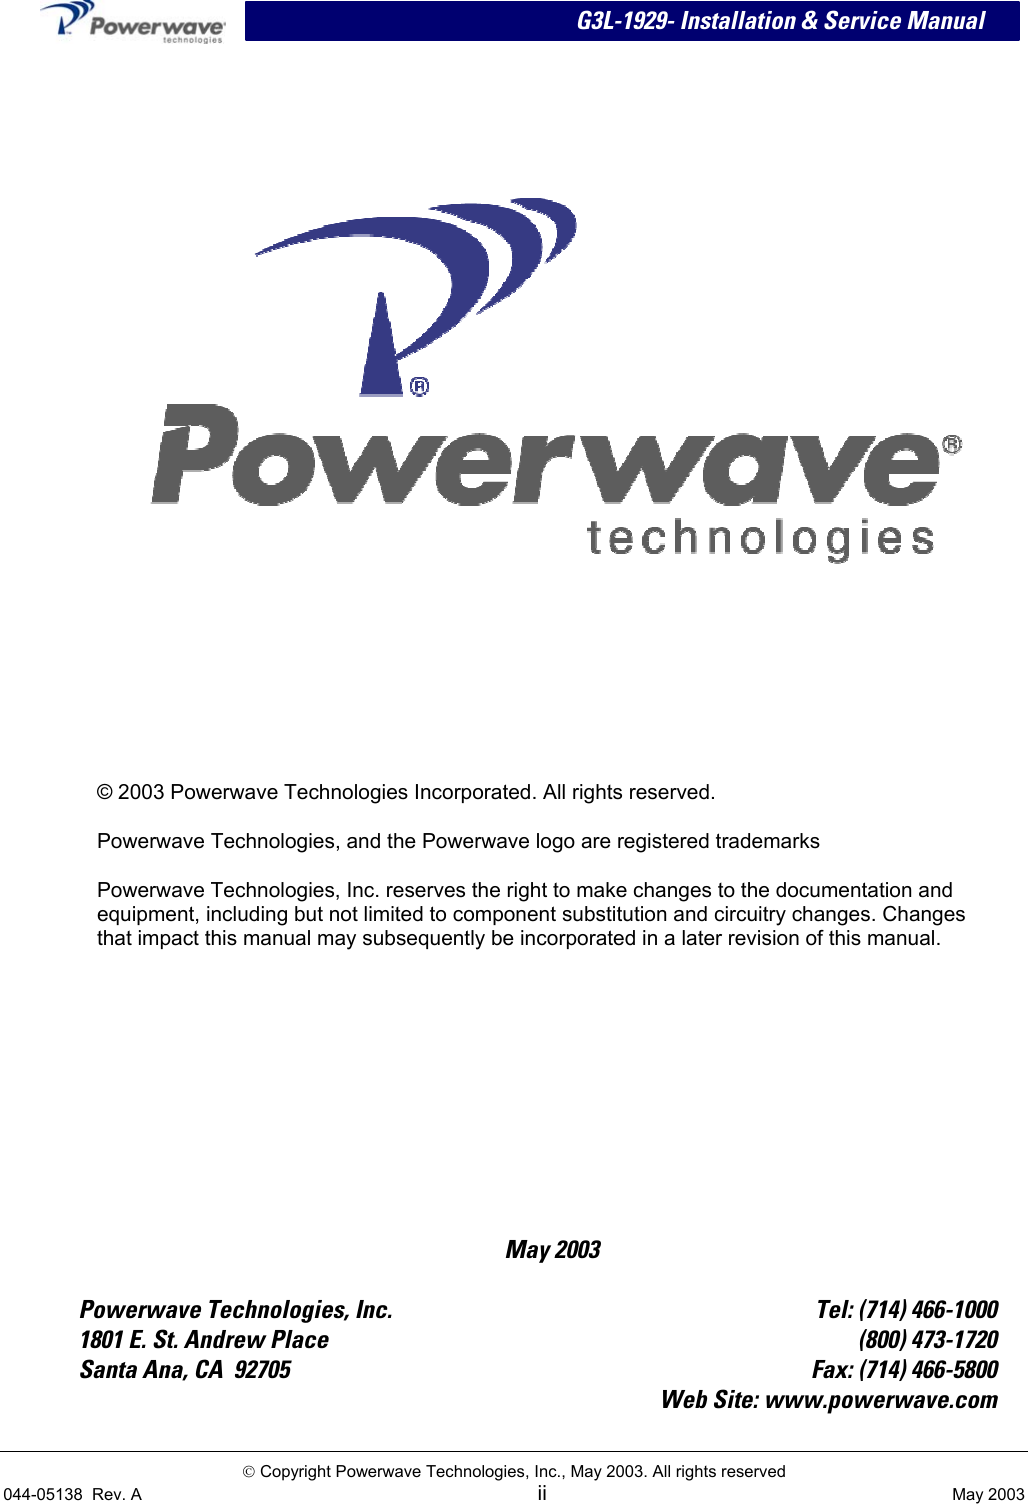  G3L-1929- Installation &amp; Service Manual  May 2003    © 2003 Powerwave Technologies Incorporated. All rights reserved. Powerwave Technologies, and the Powerwave logo are registered trademarks Powerwave Technologies, Inc. reserves the right to make changes to the documentation and equipment, including but not limited to component substitution and circuitry changes. Changes that impact this manual may subsequently be incorporated in a later revision of this manual.  Powerwave Technologies, Inc.  Tel: (714) 466-1000 1801 E. St. Andrew Place  (800) 473-1720 Santa Ana, CA  92705  Fax: (714) 466-5800   Web Site: www.powerwave.com  Copyright Powerwave Technologies, Inc., May 2003. All rights reserved 044-05138  Rev. A  ii  May 2003  